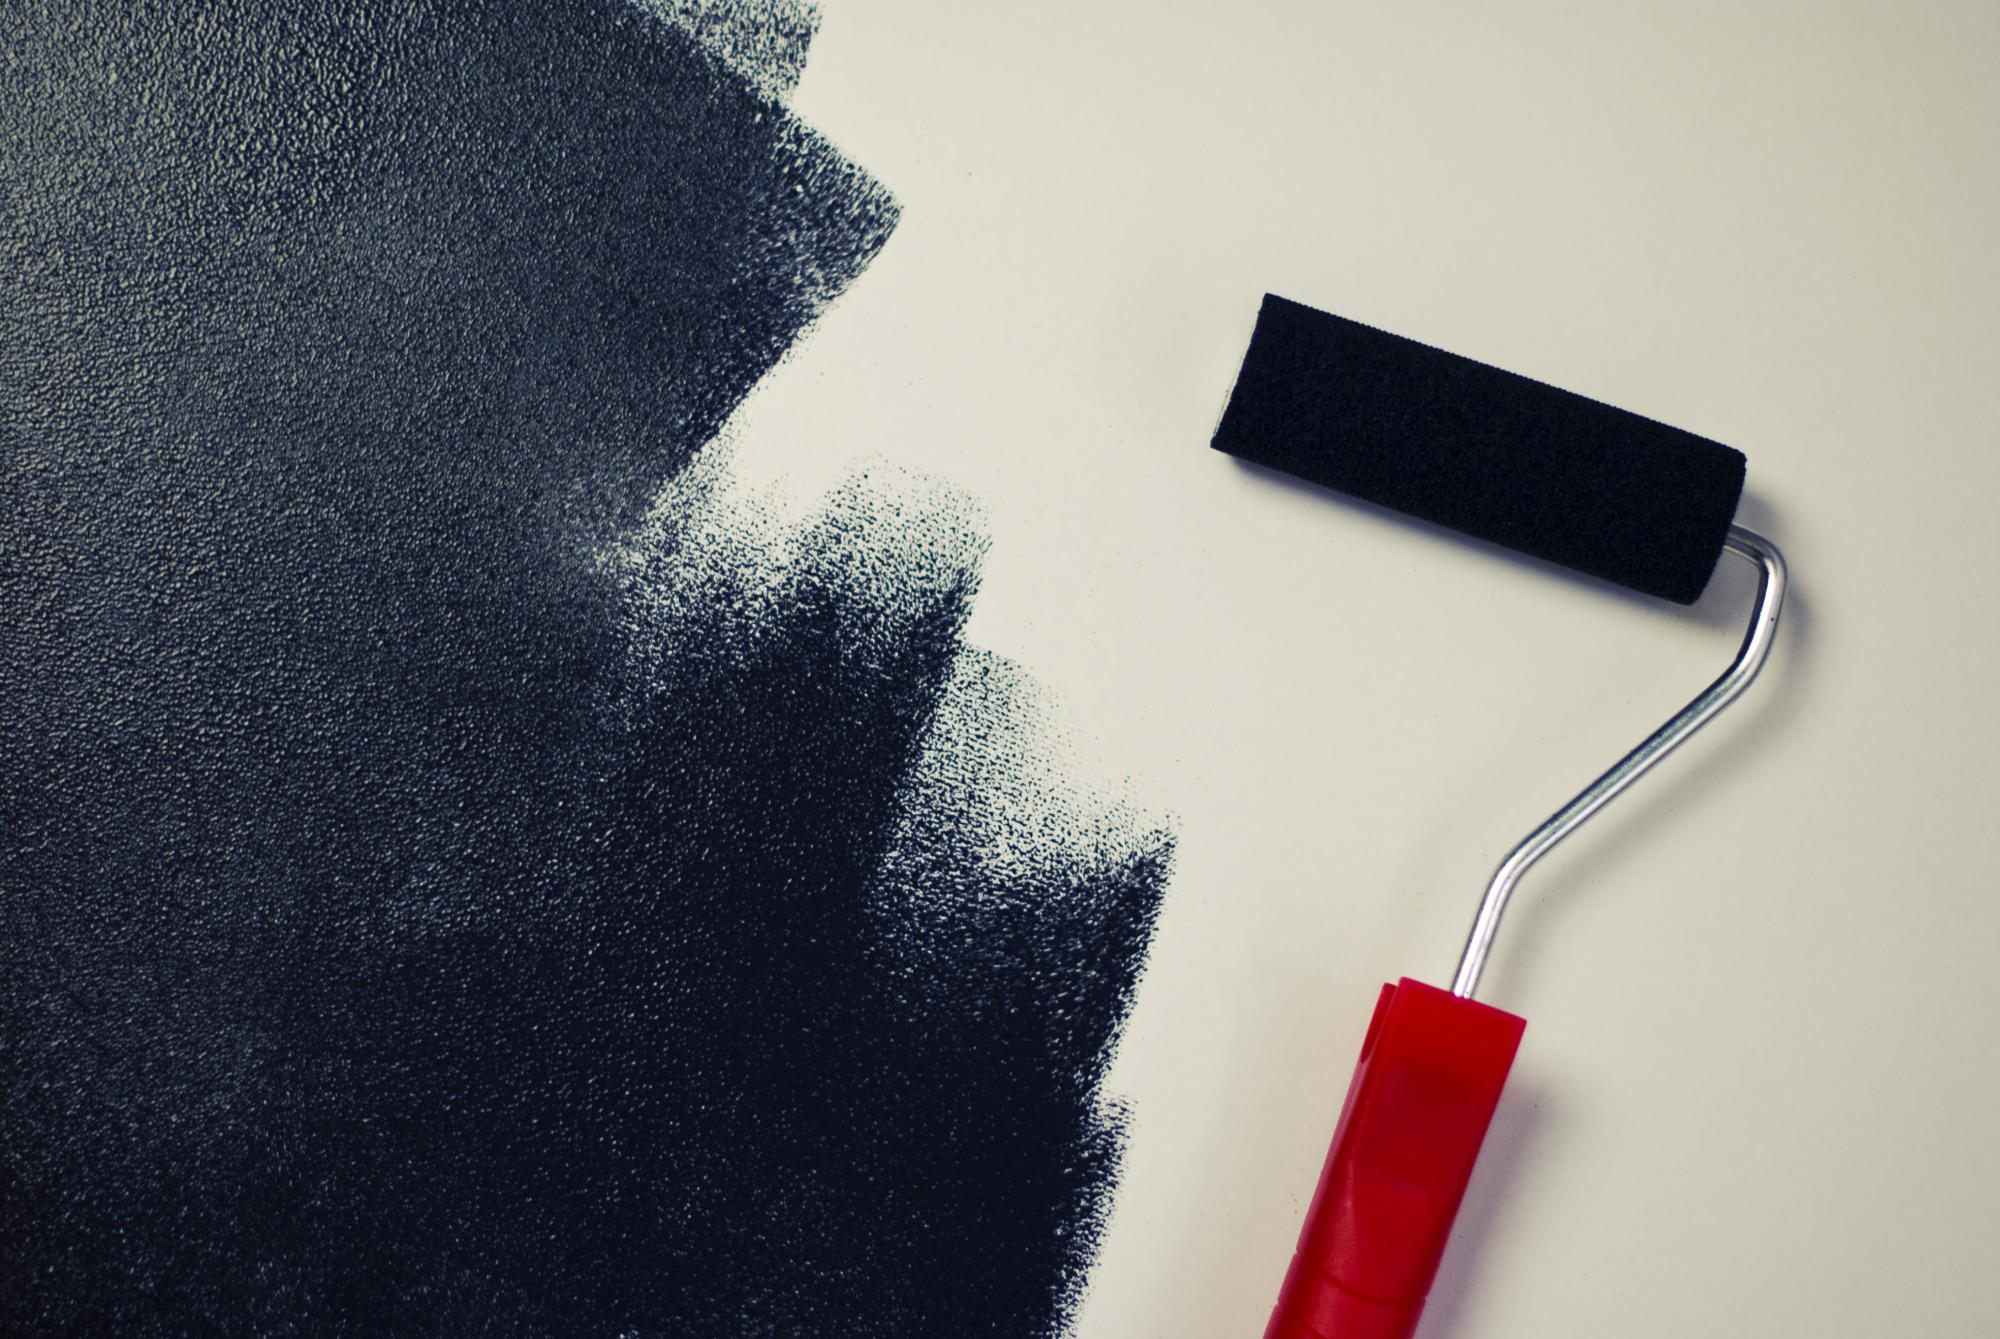 A paint roller adding black paint on a white wall, demonstrating one of the 7 deadly sins of home decorating.